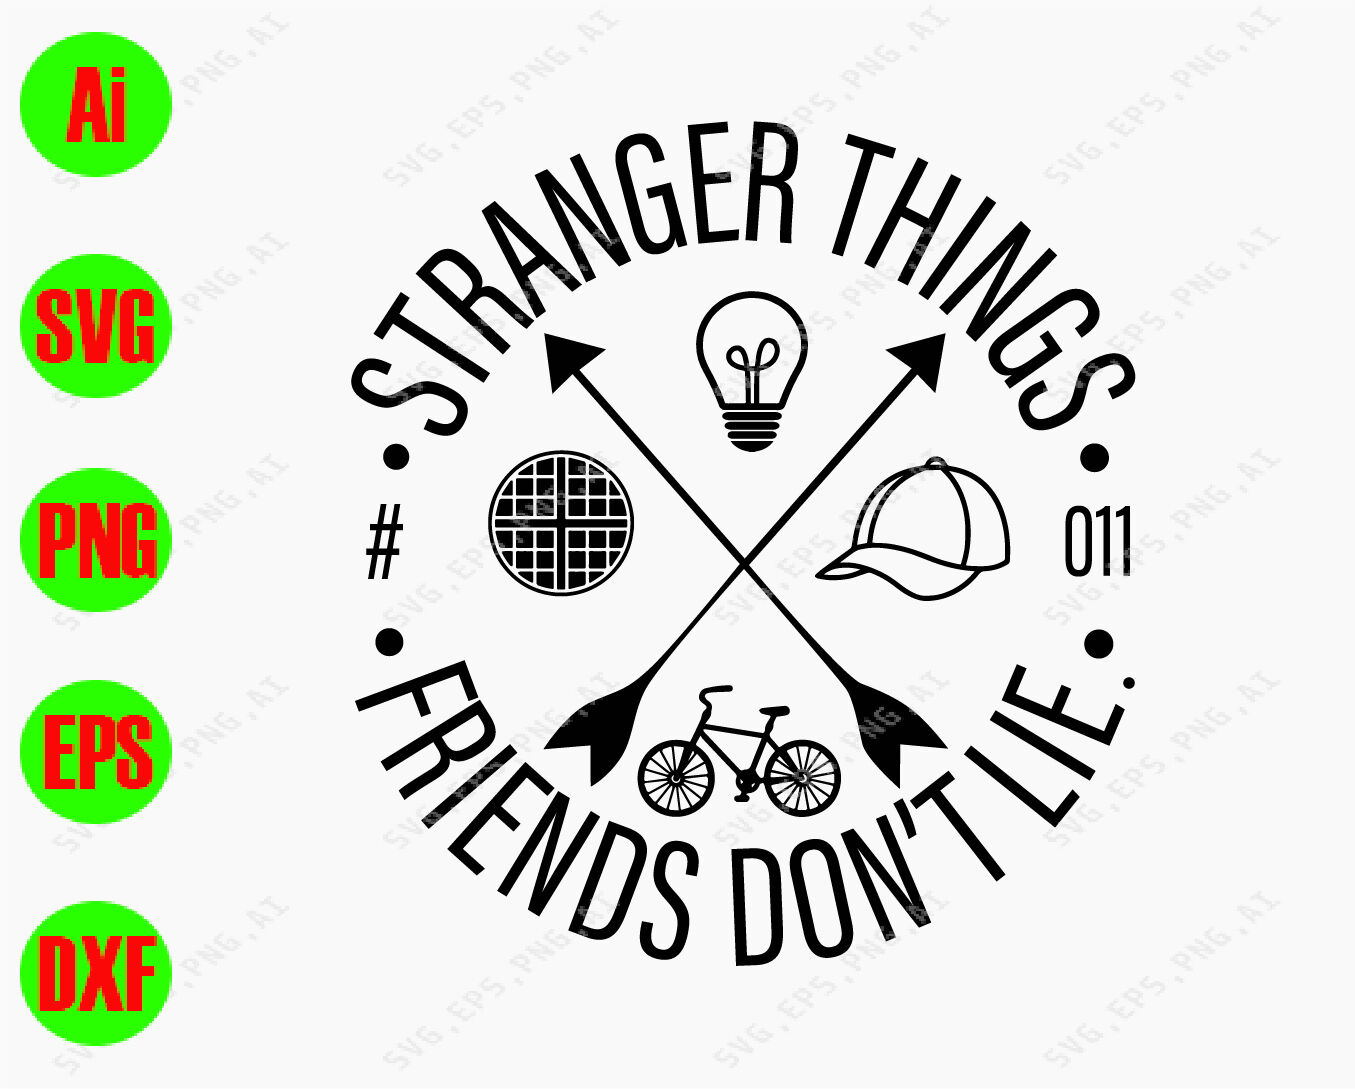 Download Stranger things friends don't lie svg, dxf,eps,png ...